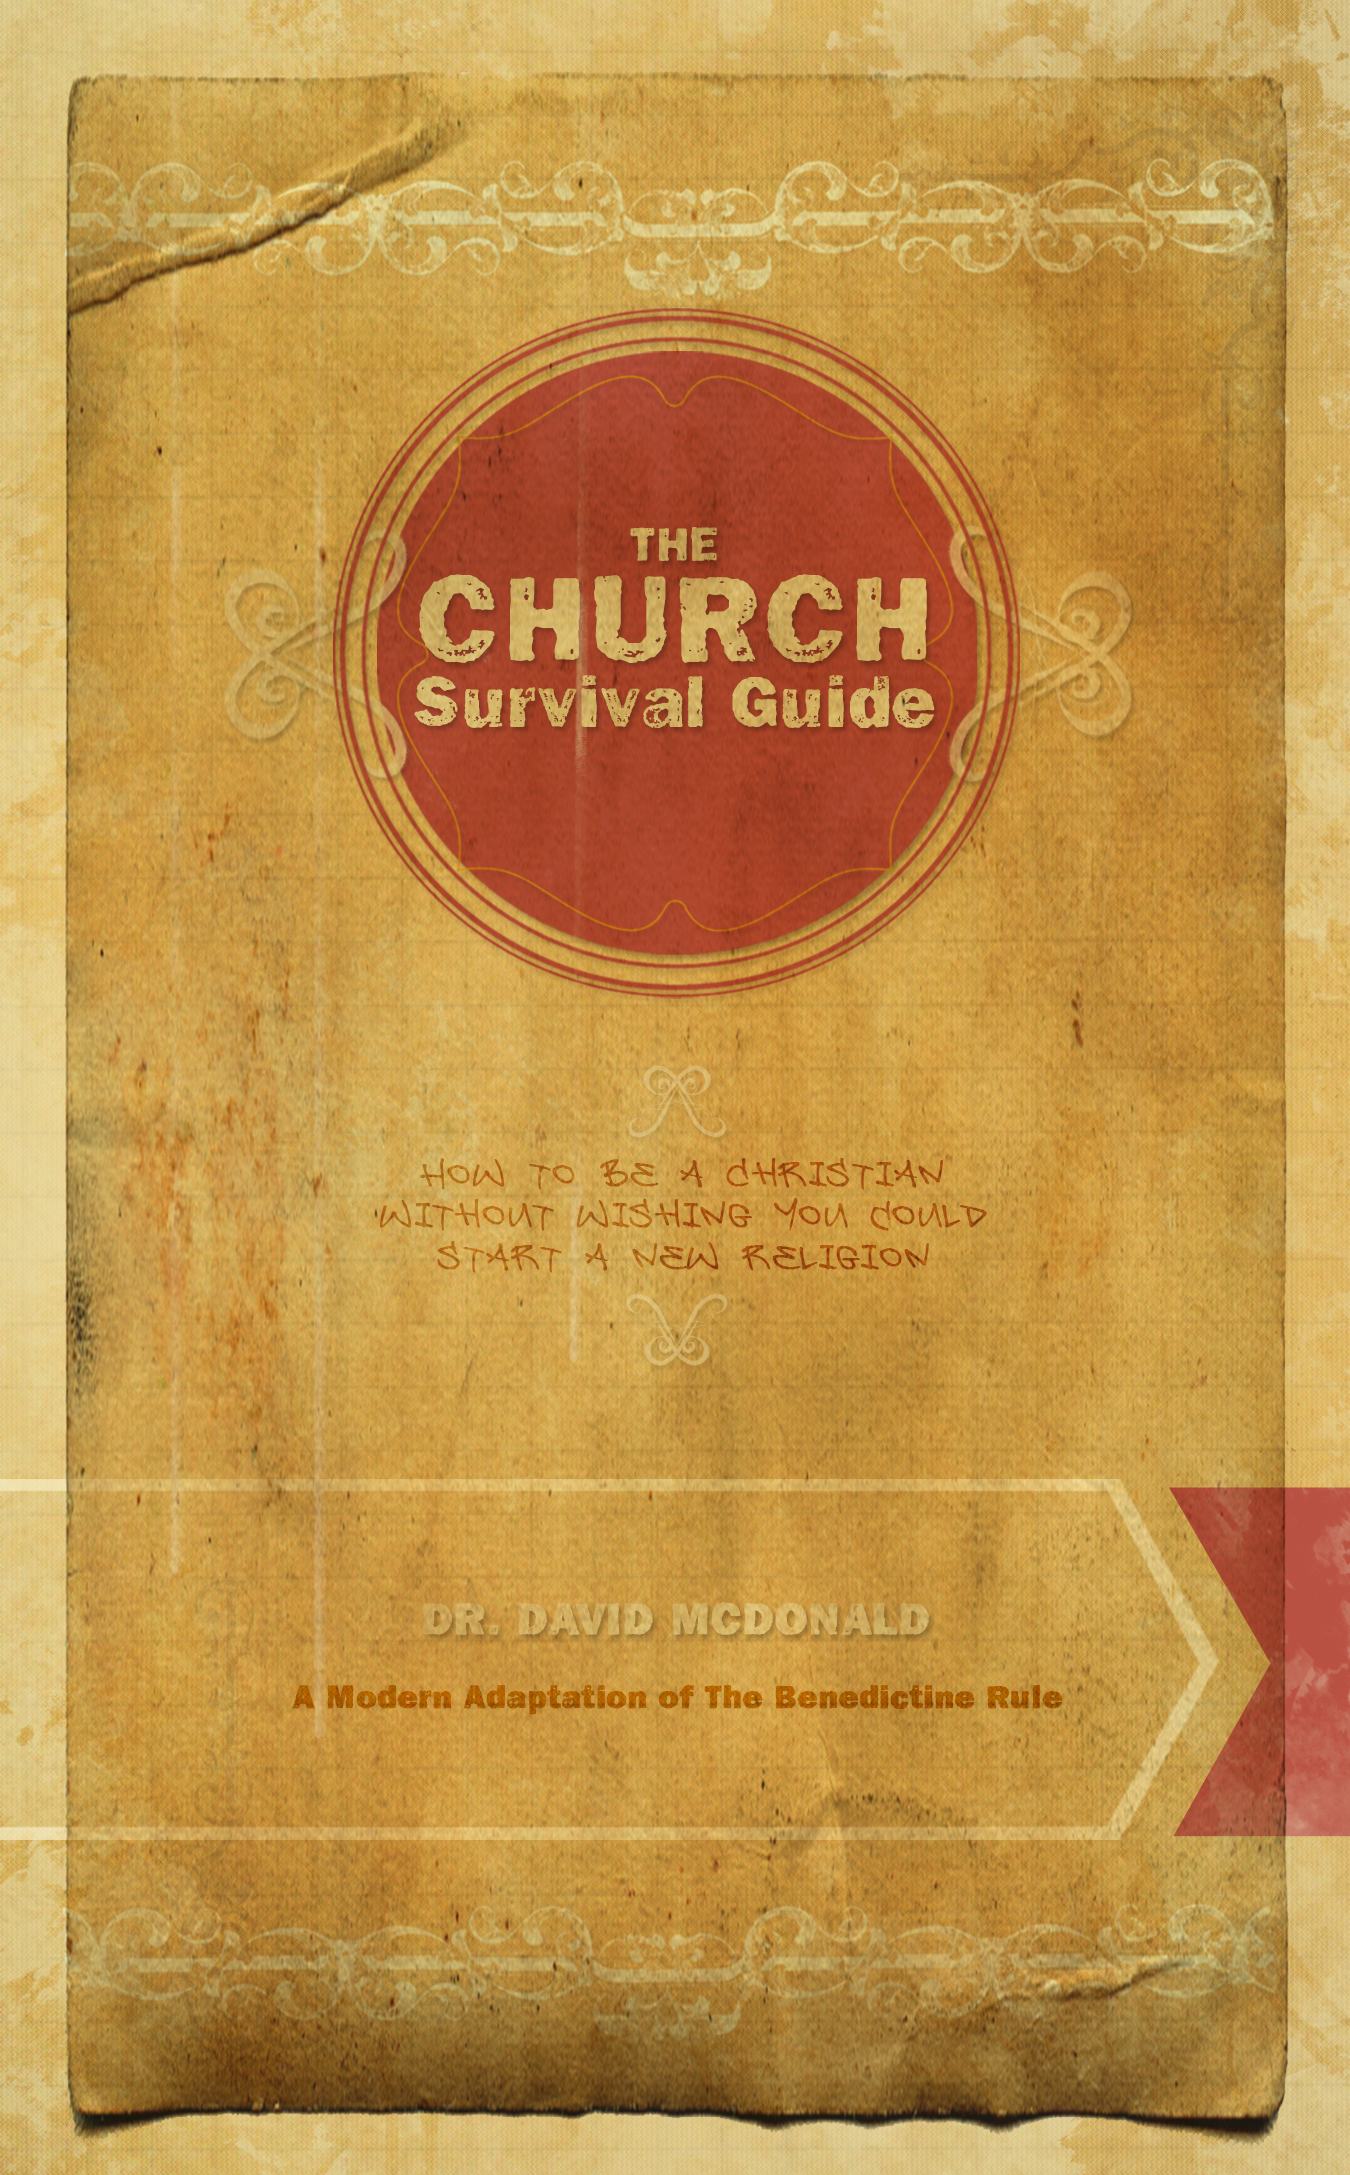 The Church Survival Guide- now available!